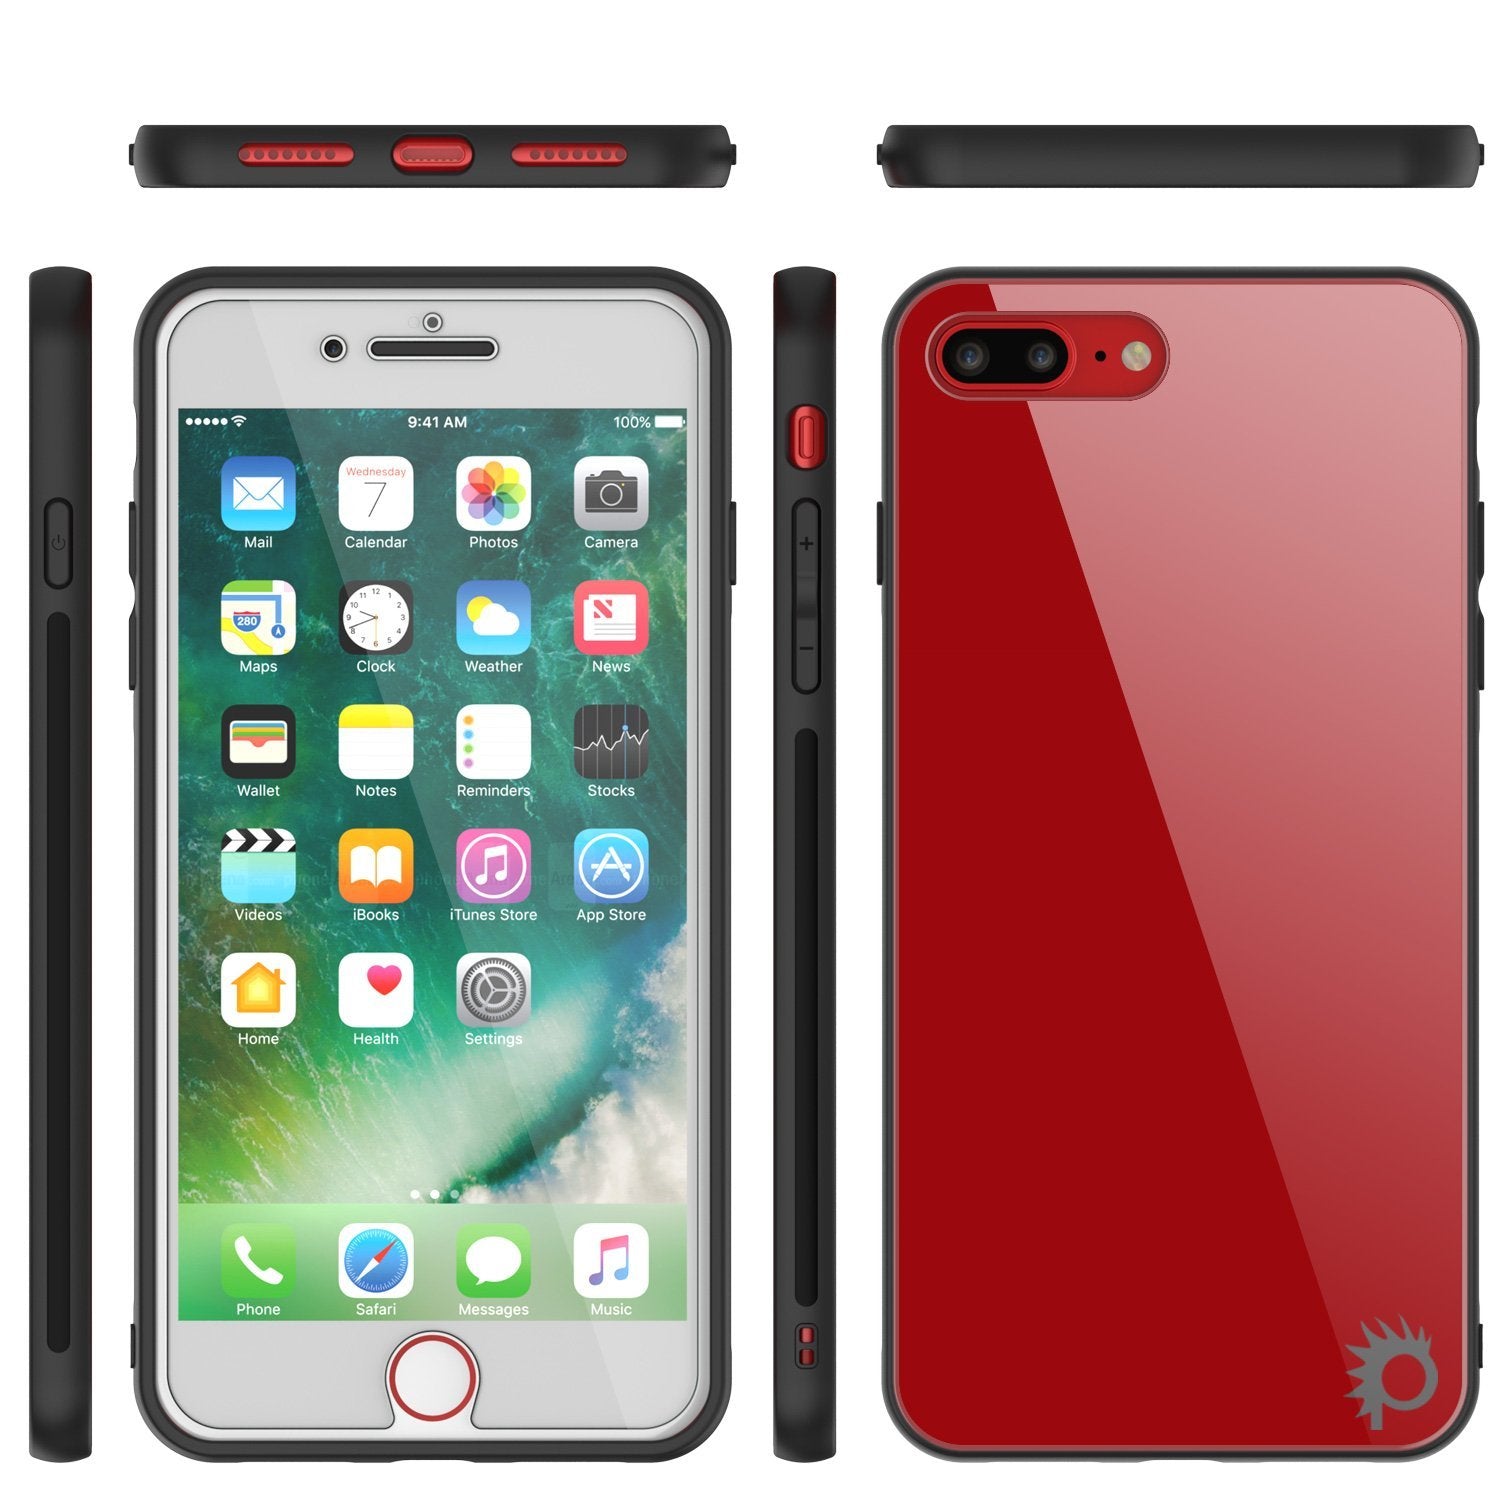 iPhone 8 PLUS Case, Punkcase GlassShield Ultra Thin Protective 9H Full Body Tempered Glass Cover W/ Drop Protection & Non Slip Grip for Apple iPhone 7 PLUS / Apple iPhone 8 PLUS (Red)